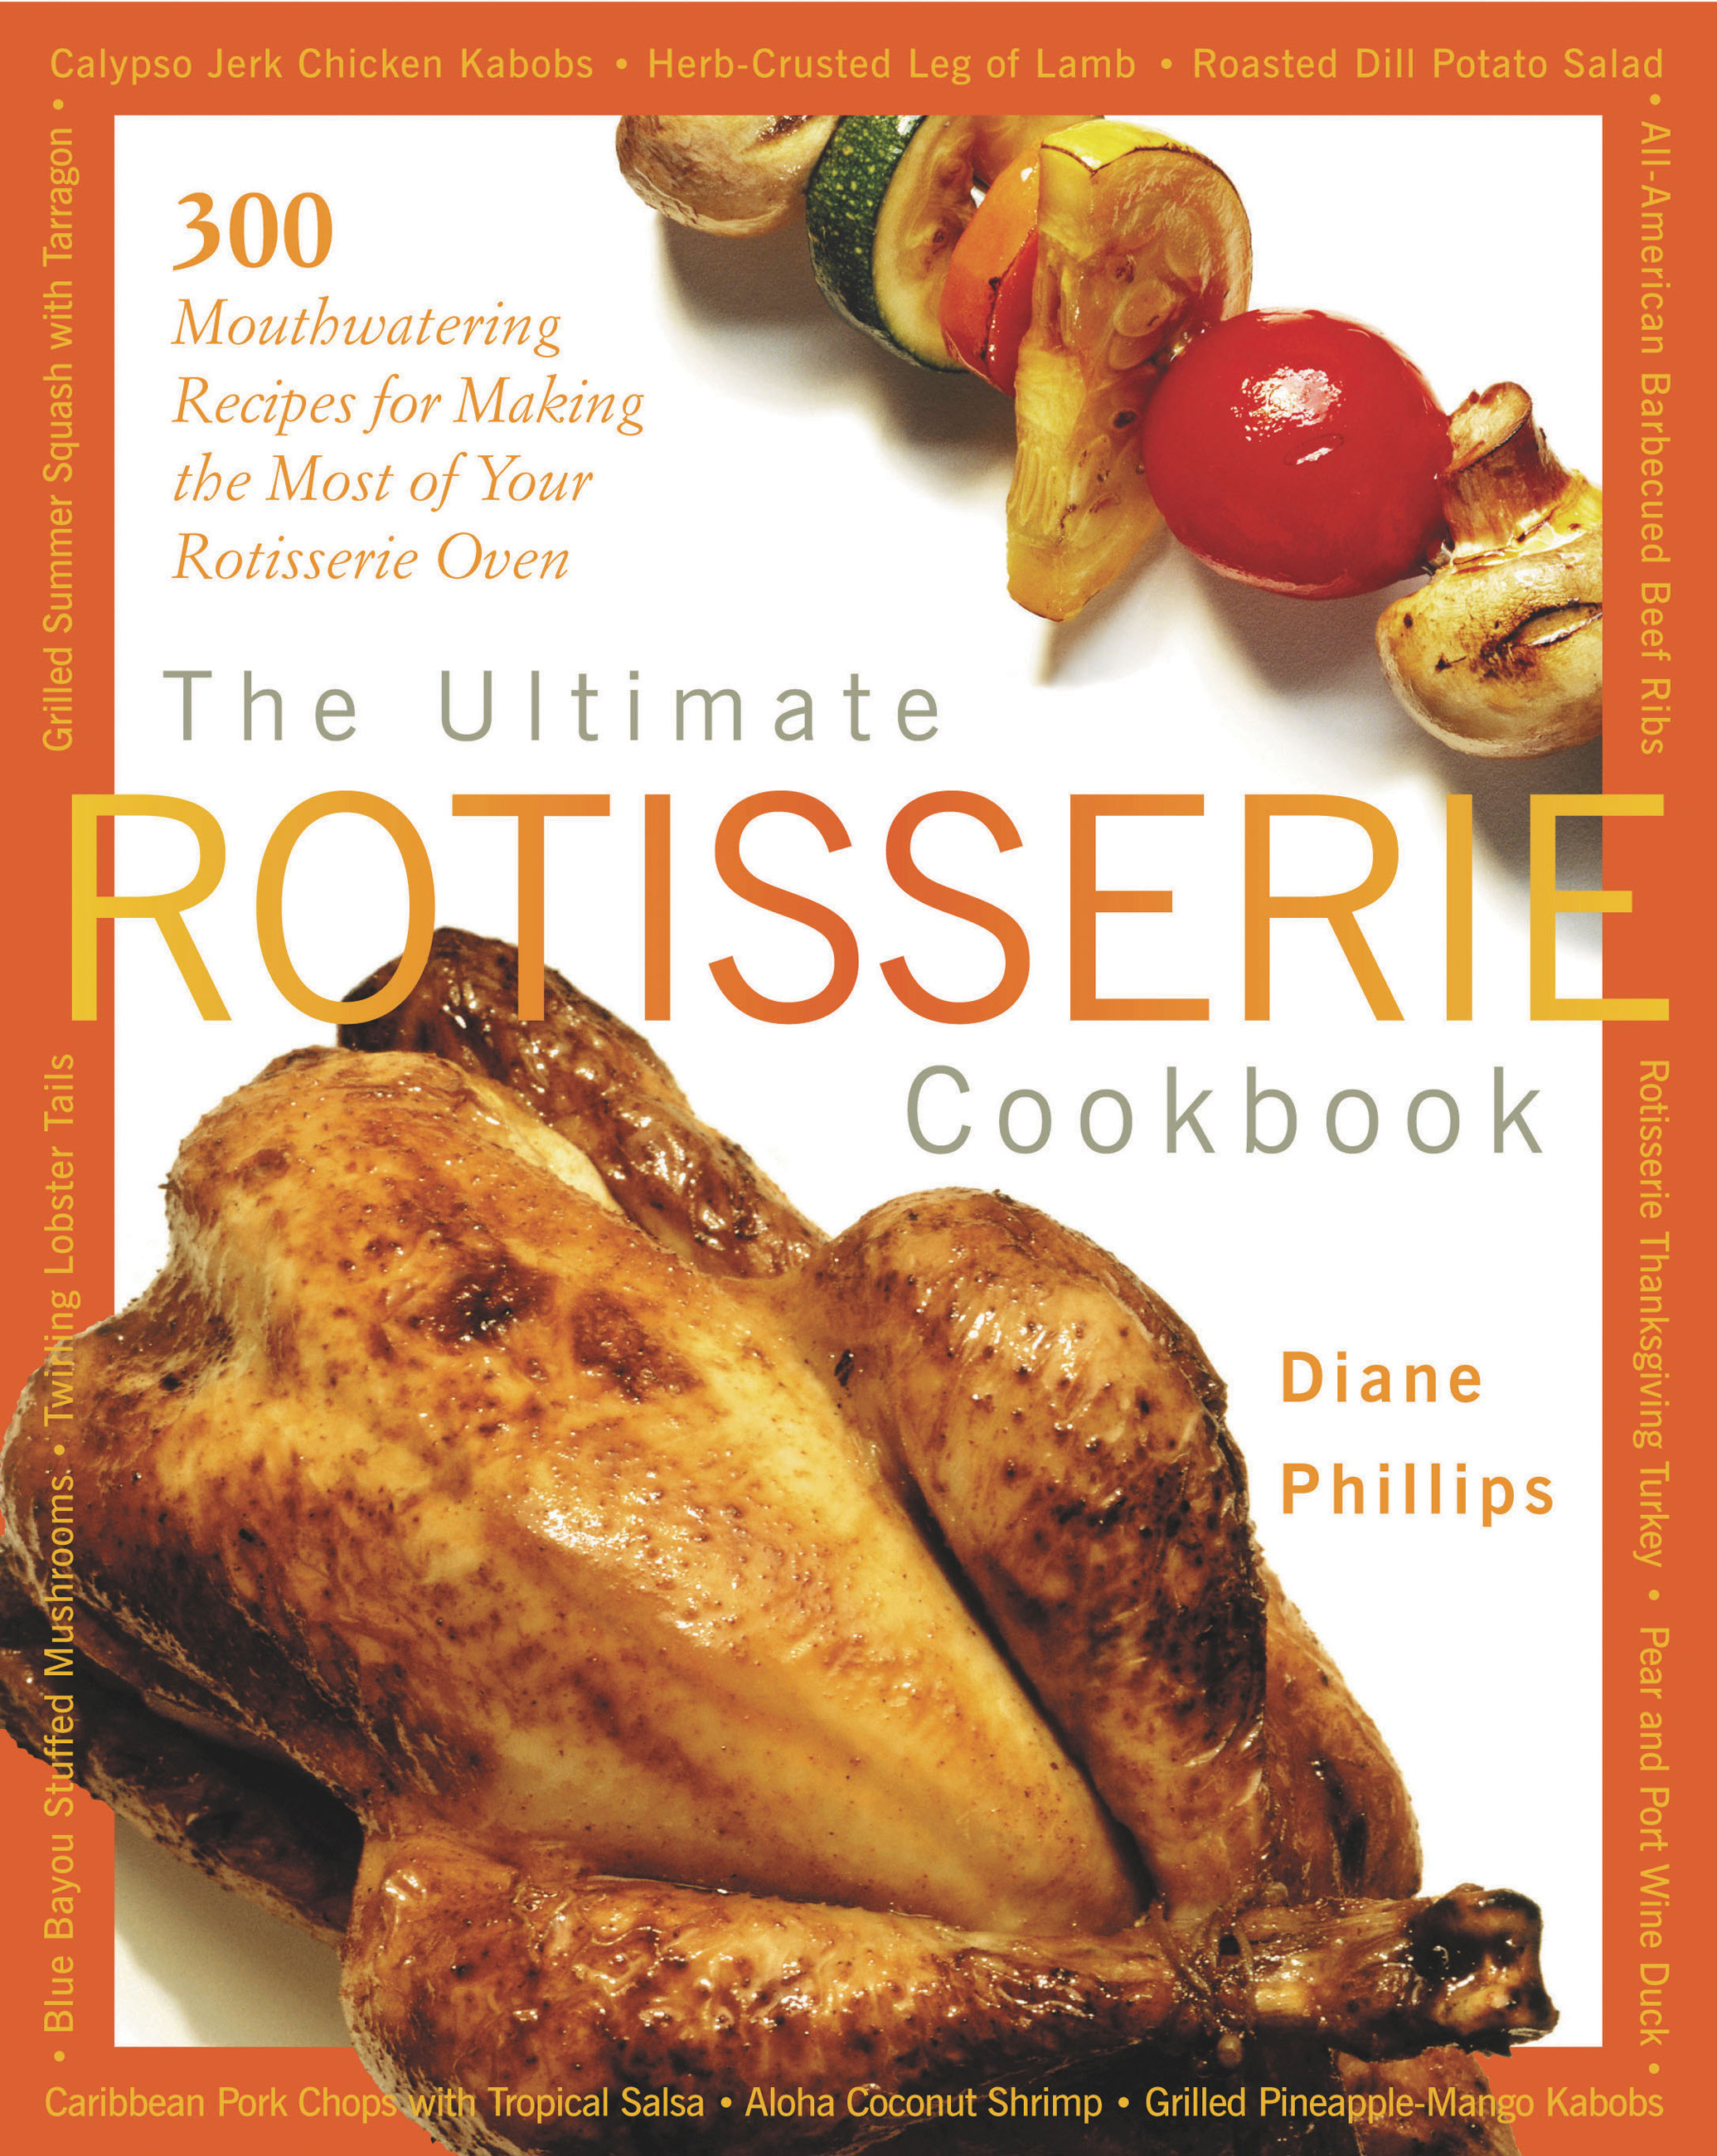 Umschlagbild für Ultimate Rotisserie Cookbook [electronic resource] : 300 Mouthwatering Recipes for Making the Most of Your Rotisserie Oven